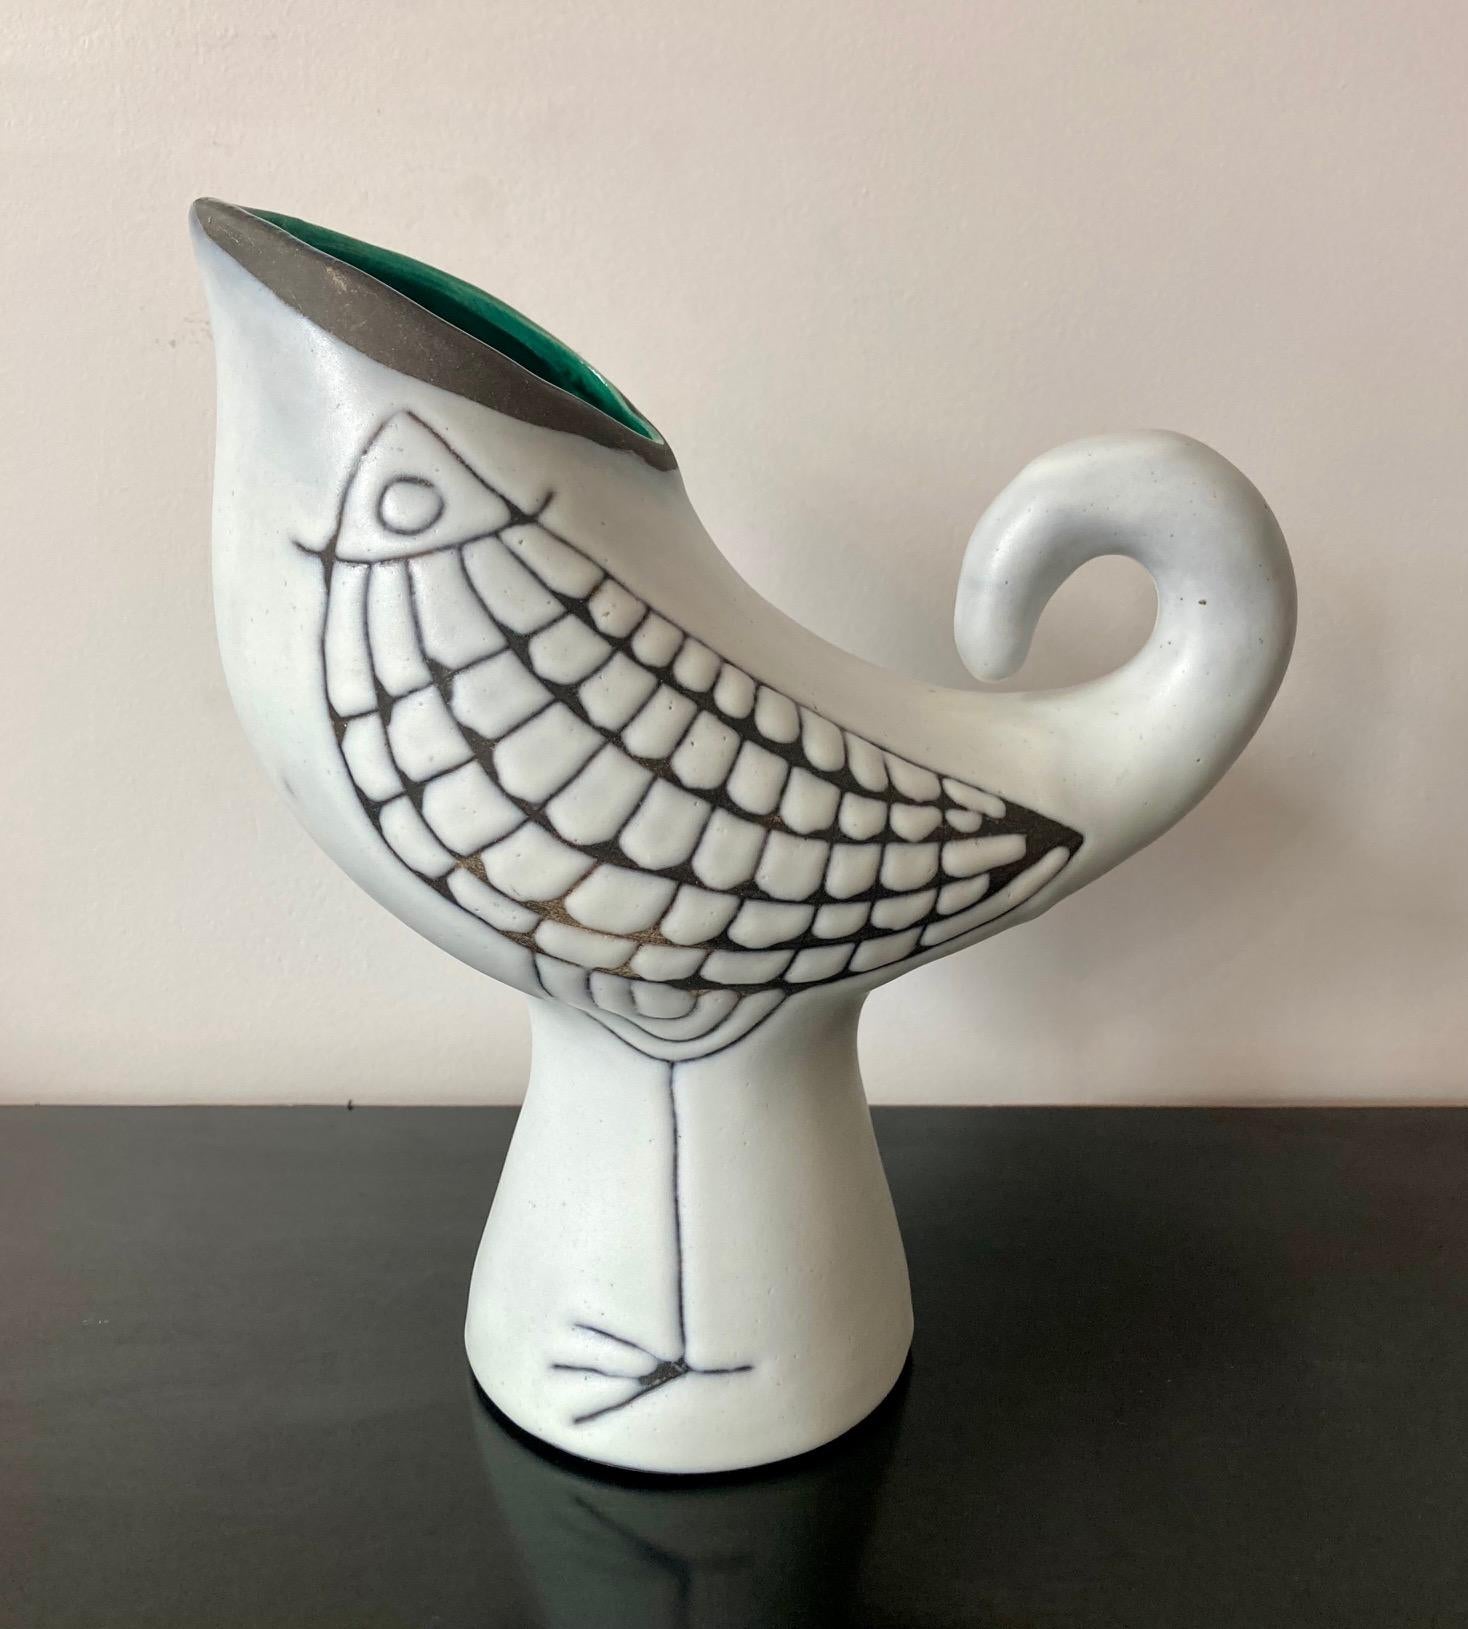 Ceramic vase / pitcher, thick white enamel with a bird motive on each side.
Green enameled collar.
A rare and attractive decor particularly well adapted to the zoomorphic shape of the vase. 

Measures: Height : 23,2 cm (9.1 in.)
Width : 13 cm